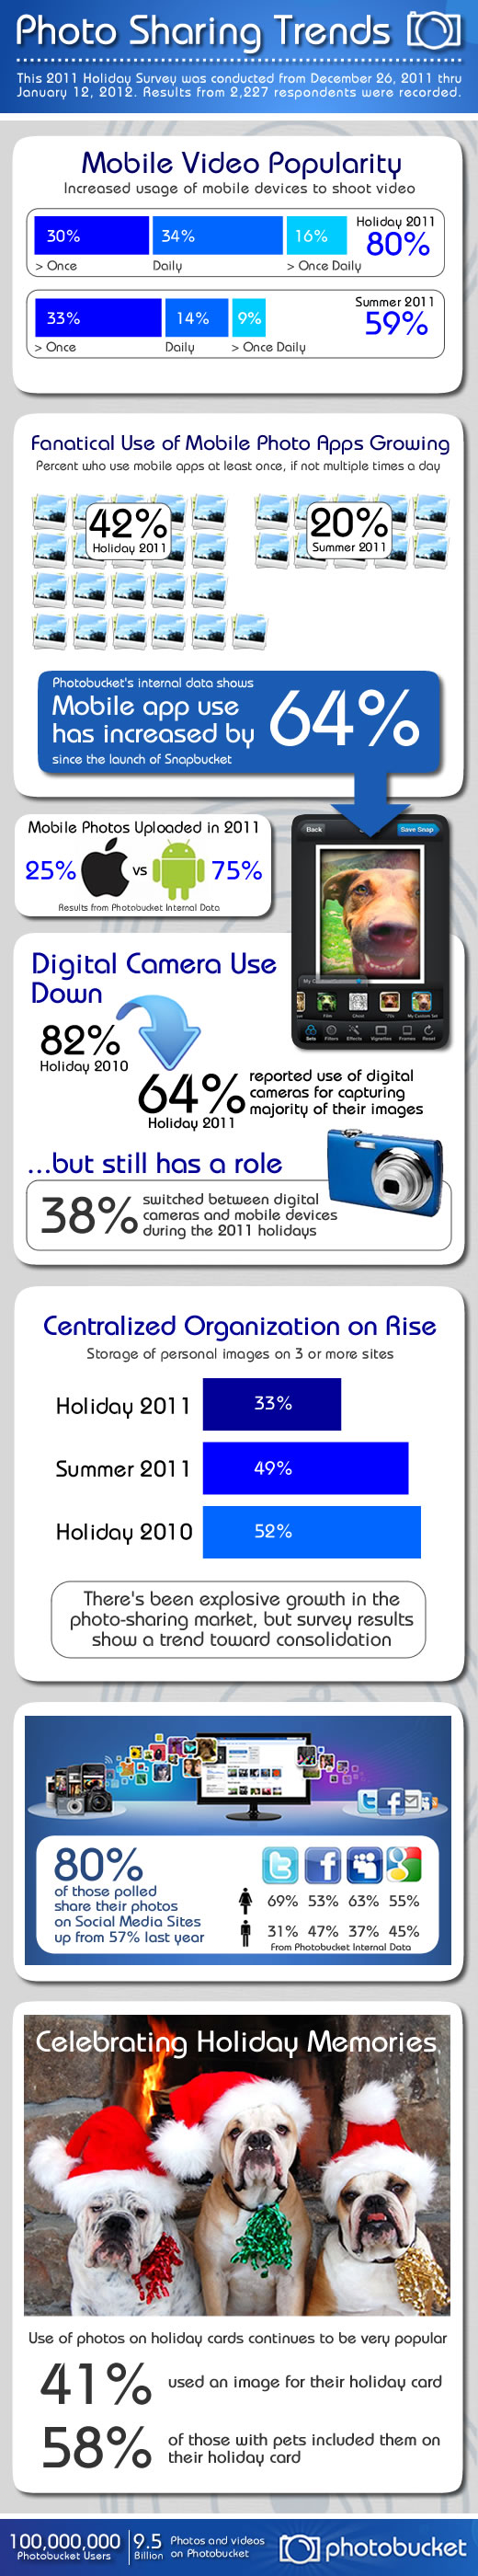 Photo Sharing Trends 2011